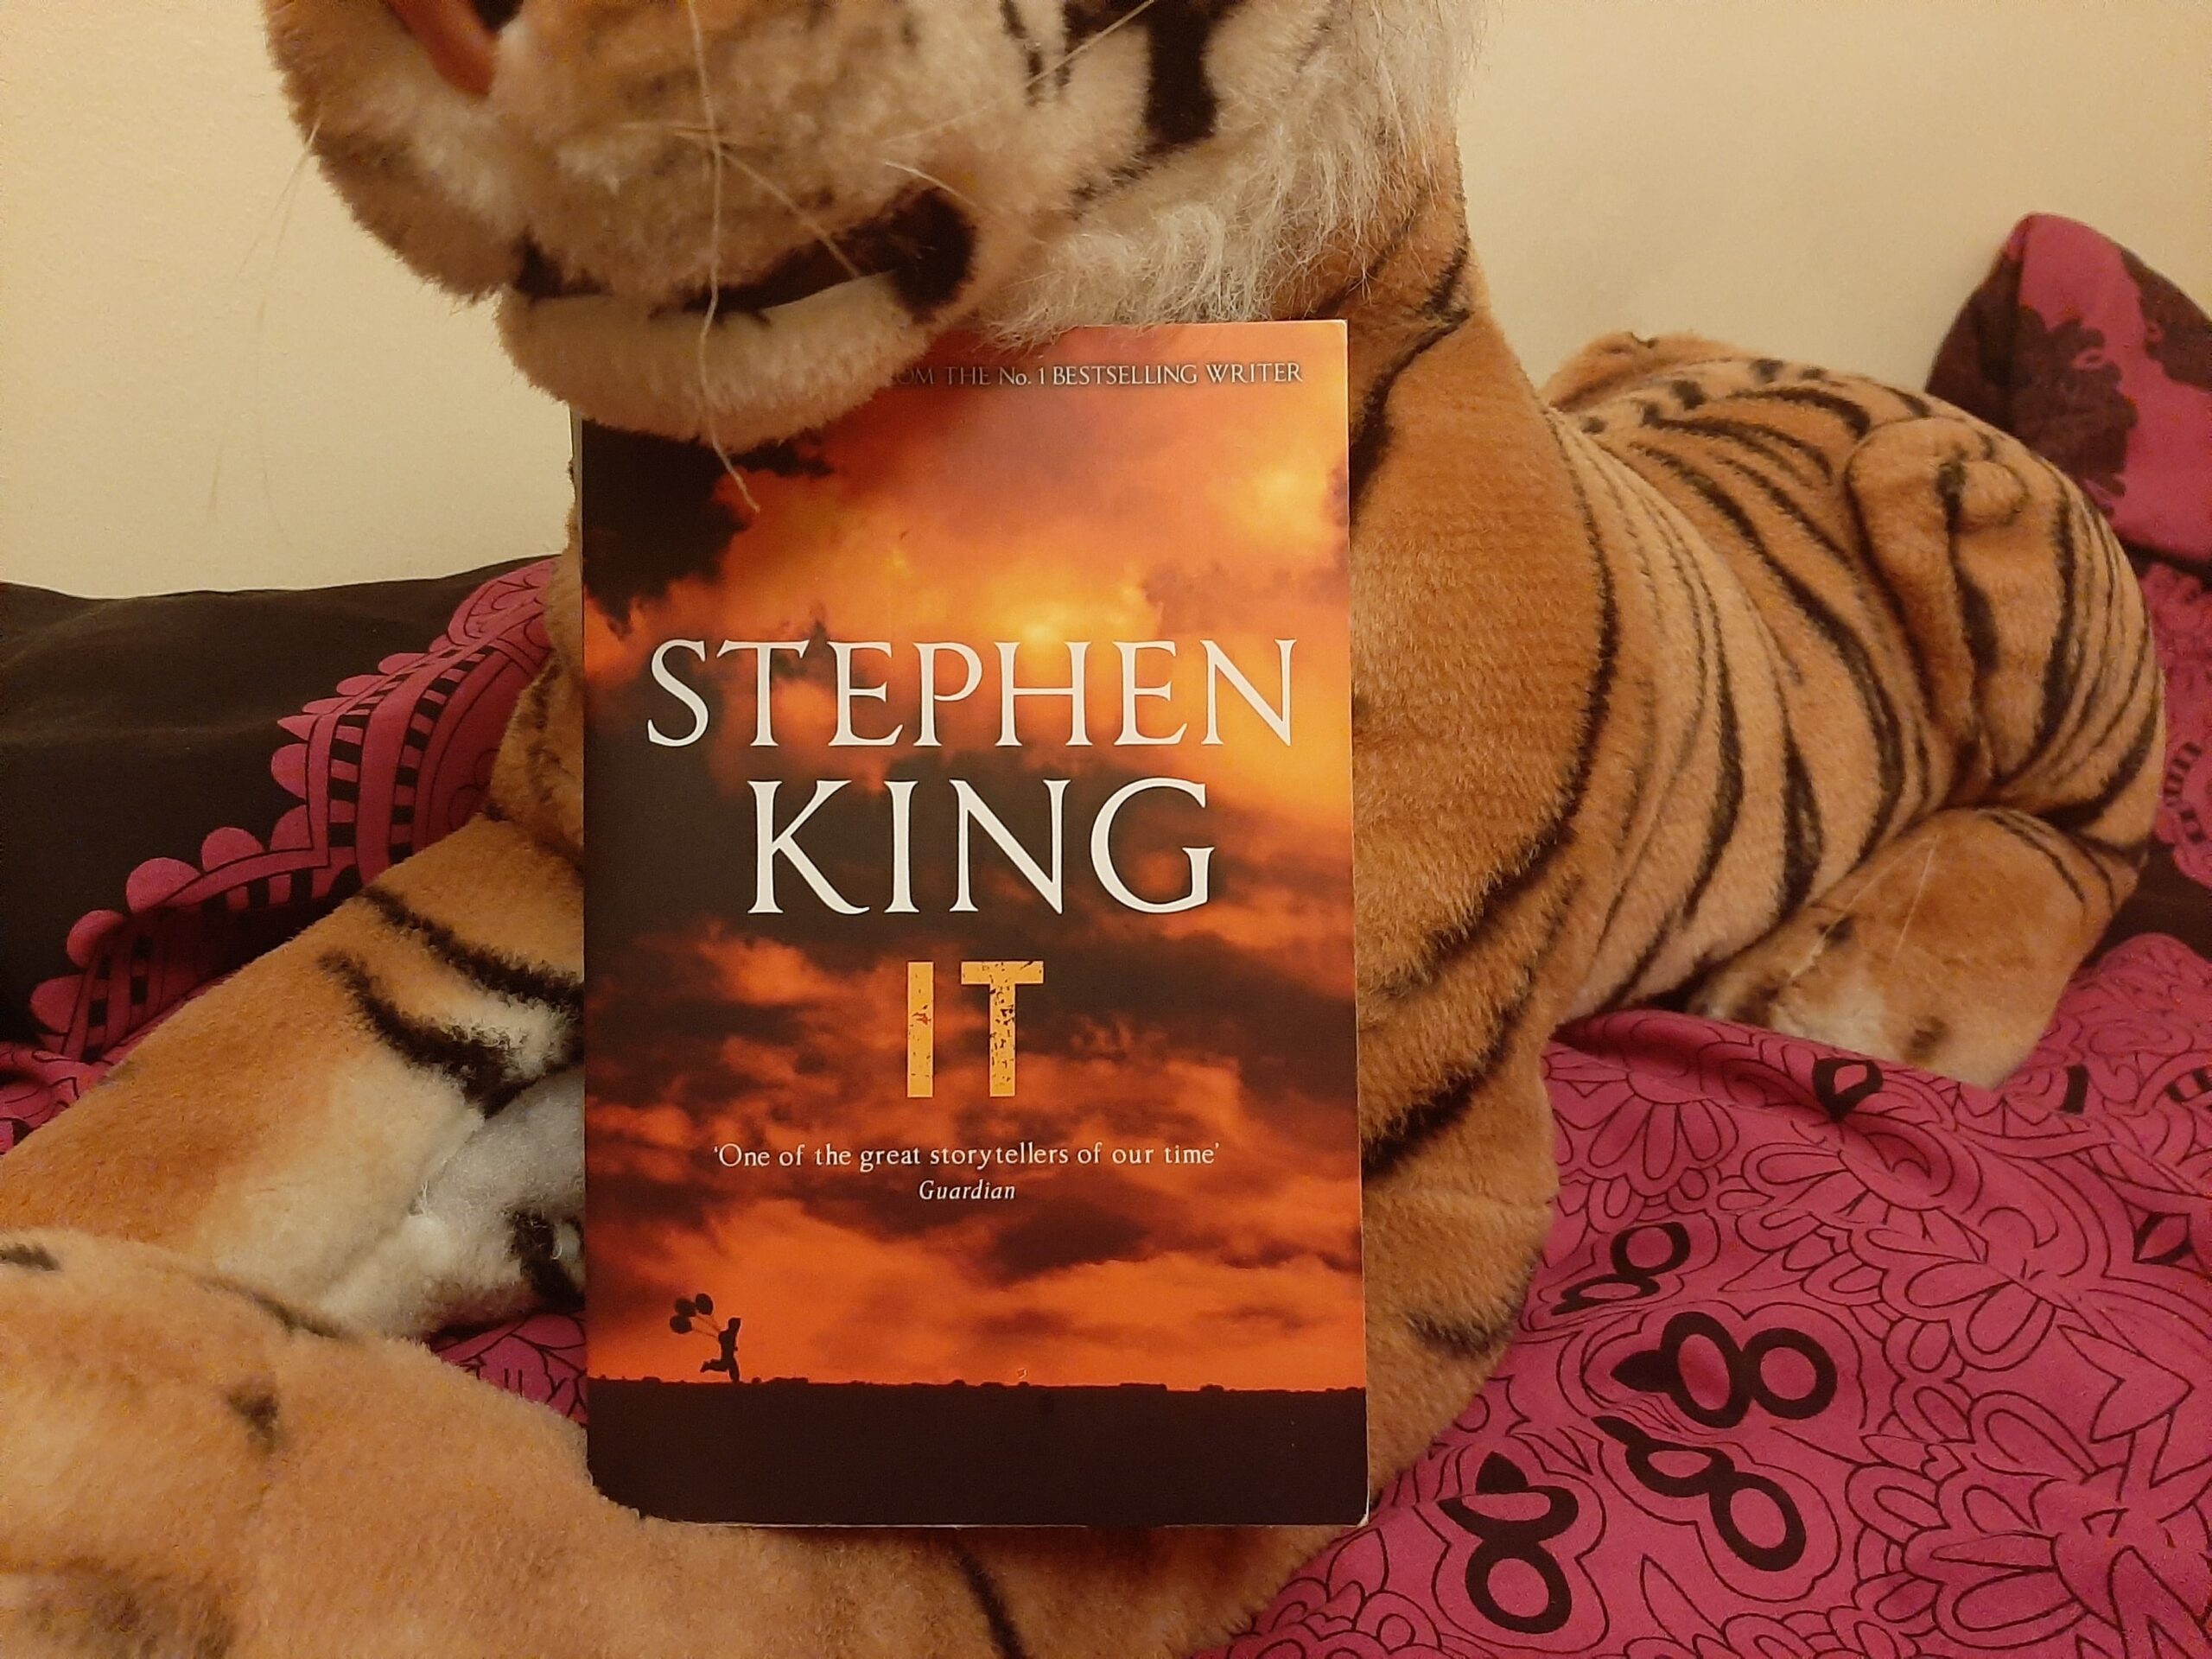 stephen king's it with tiger